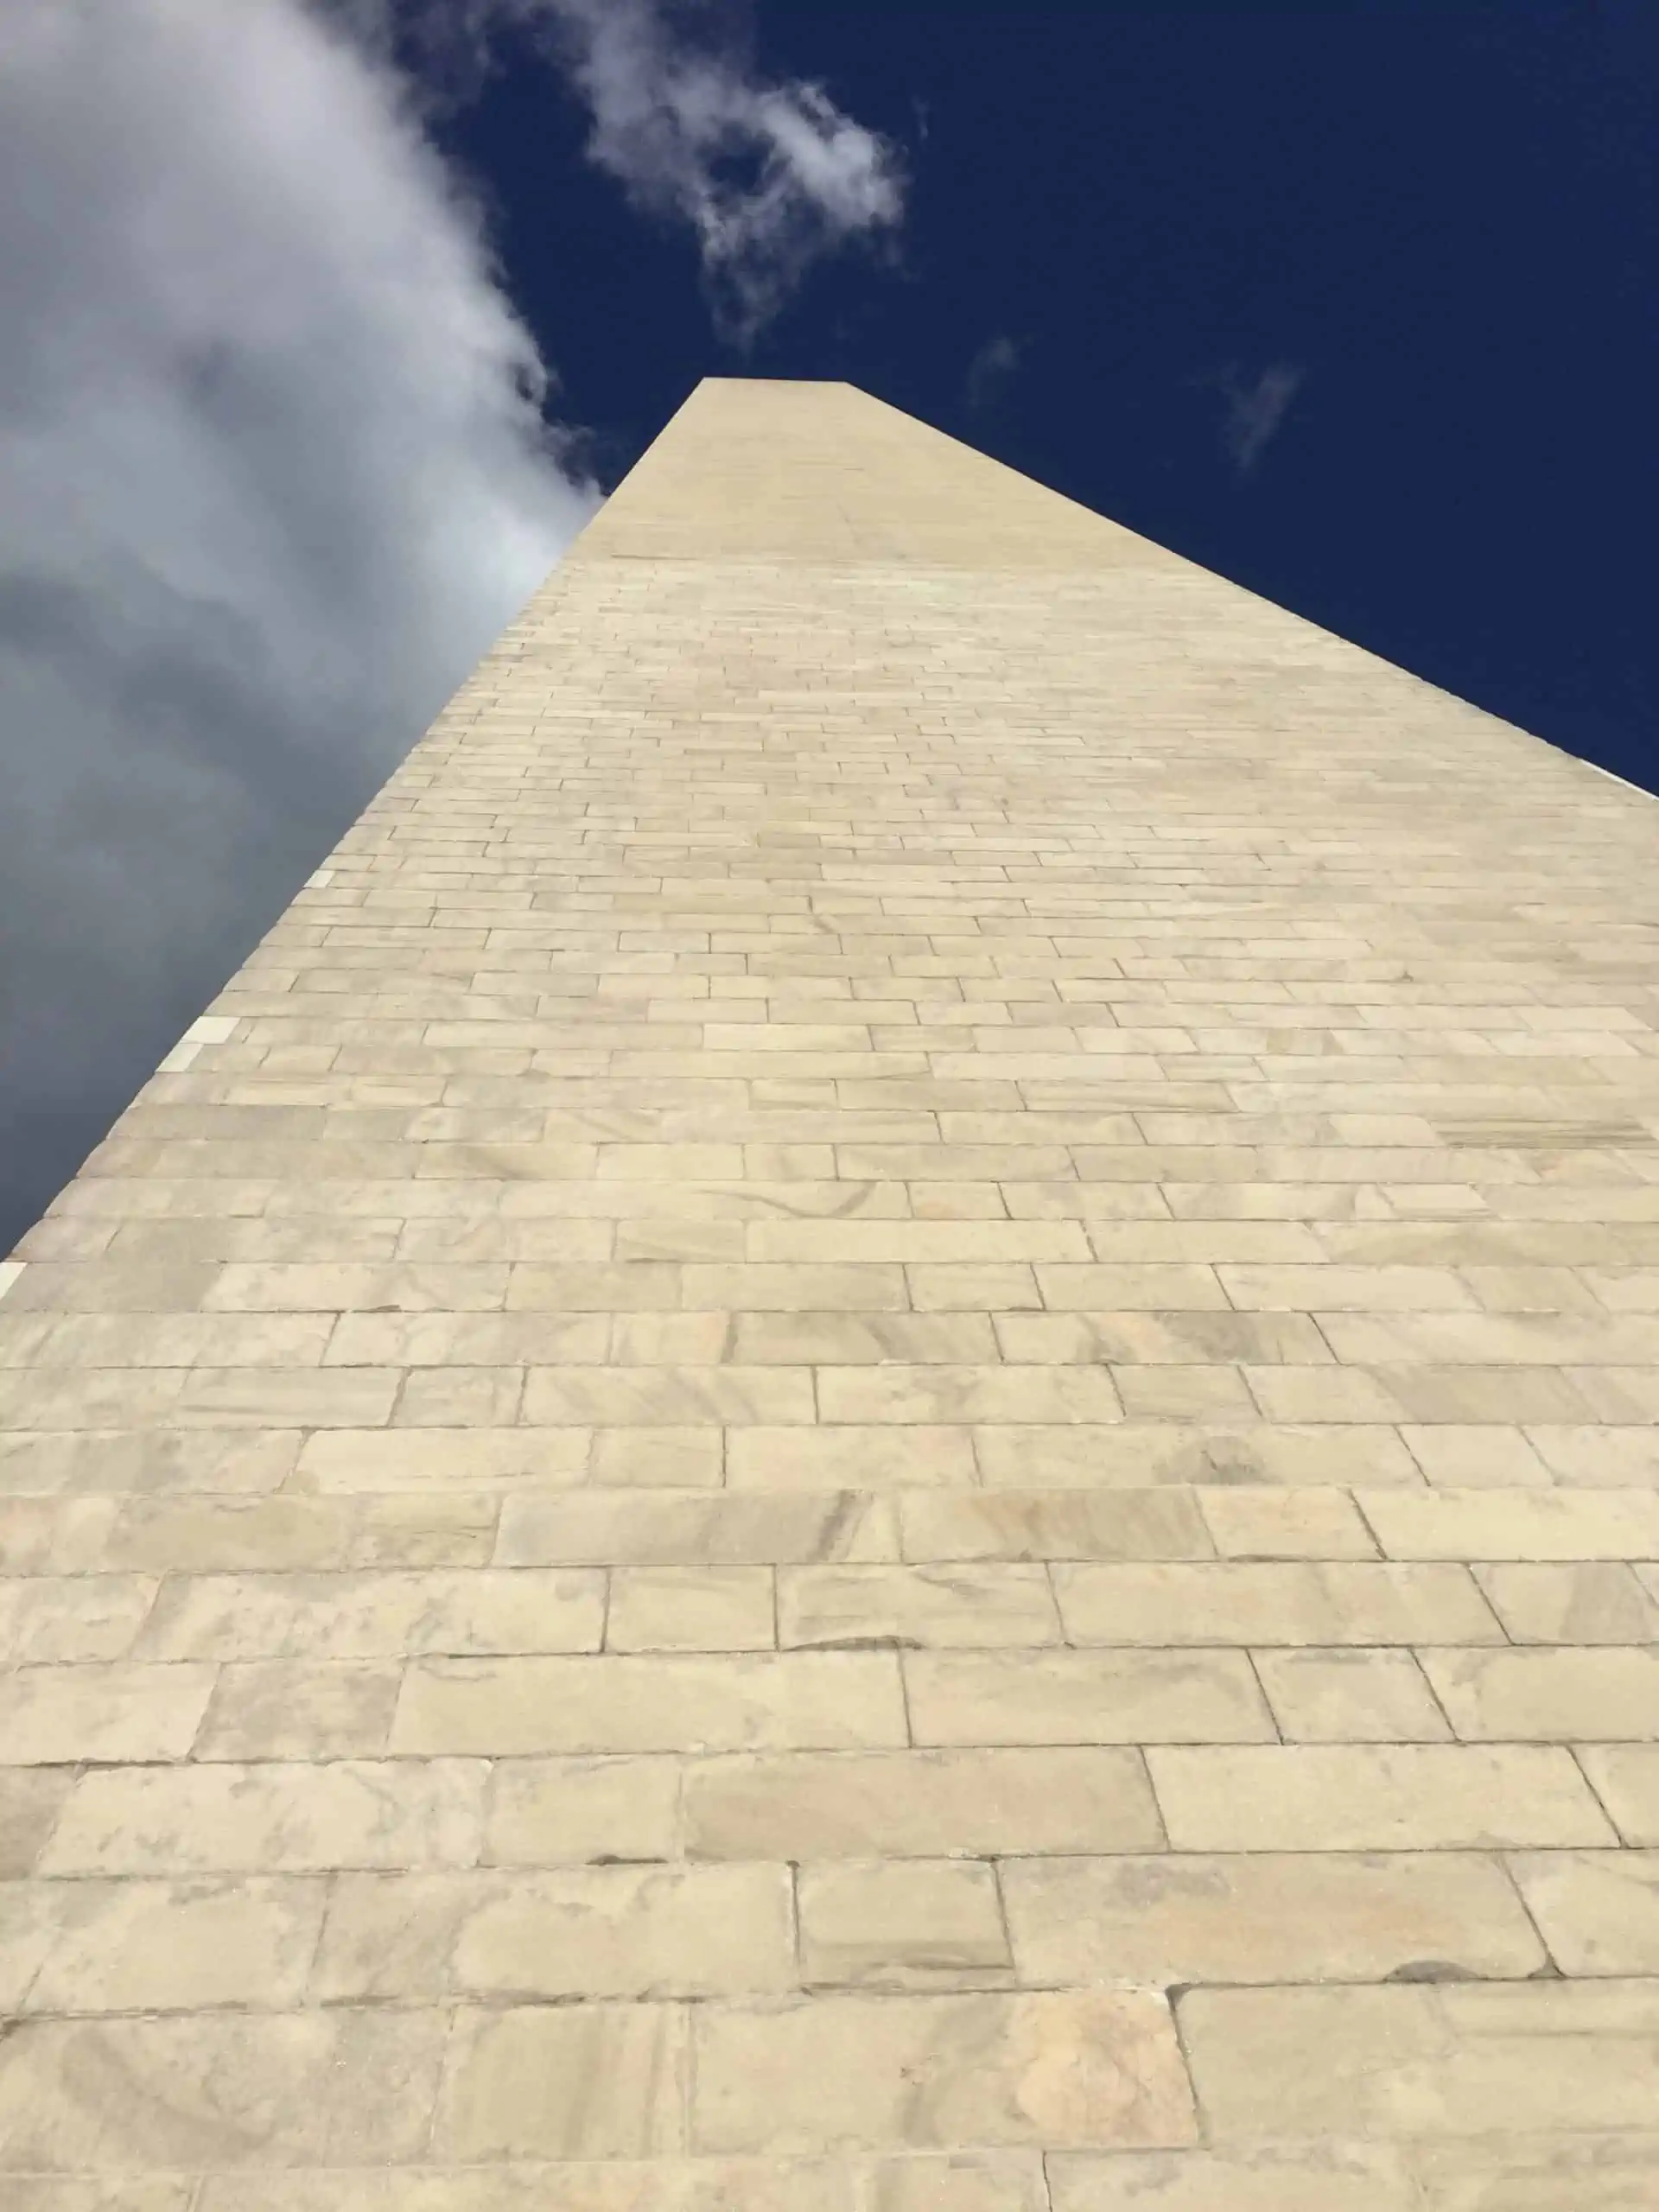 what to do in washington dc in 3 days? see these amazing monuments